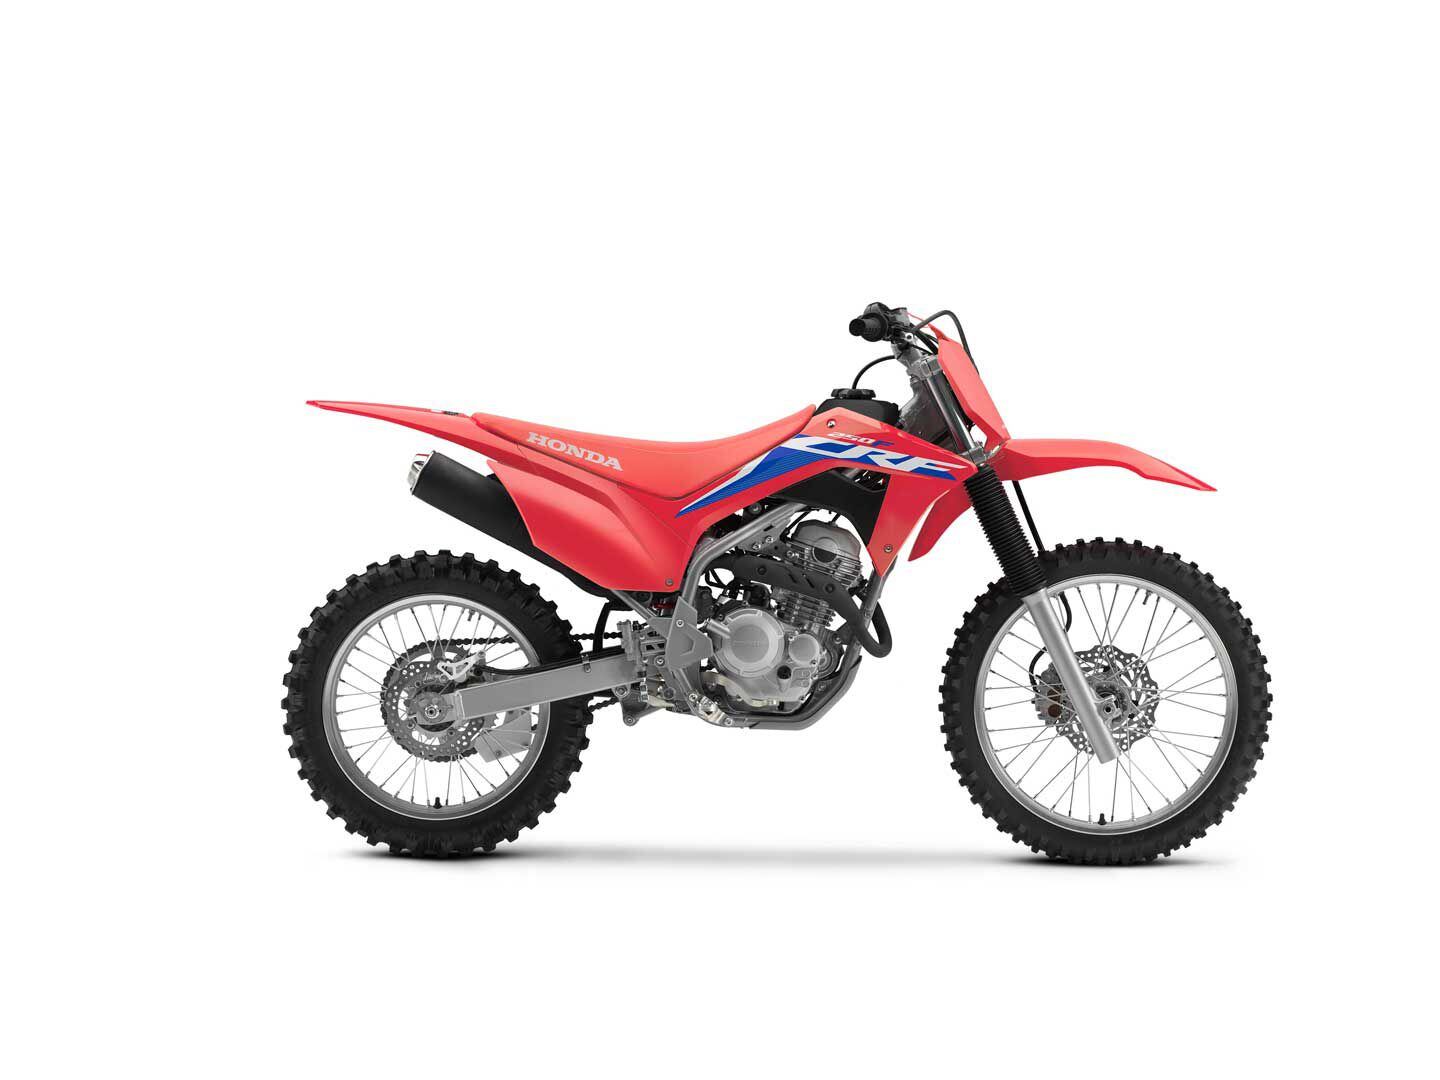 The CRF250F’s fuel-injected air-cooled SOHC four-stroke 250cc engine produces 20.1 hp and 15.5 lb.-ft. of torque on Dirt Rider’s in-house Dynojet 250i rear-wheel dynamometer.